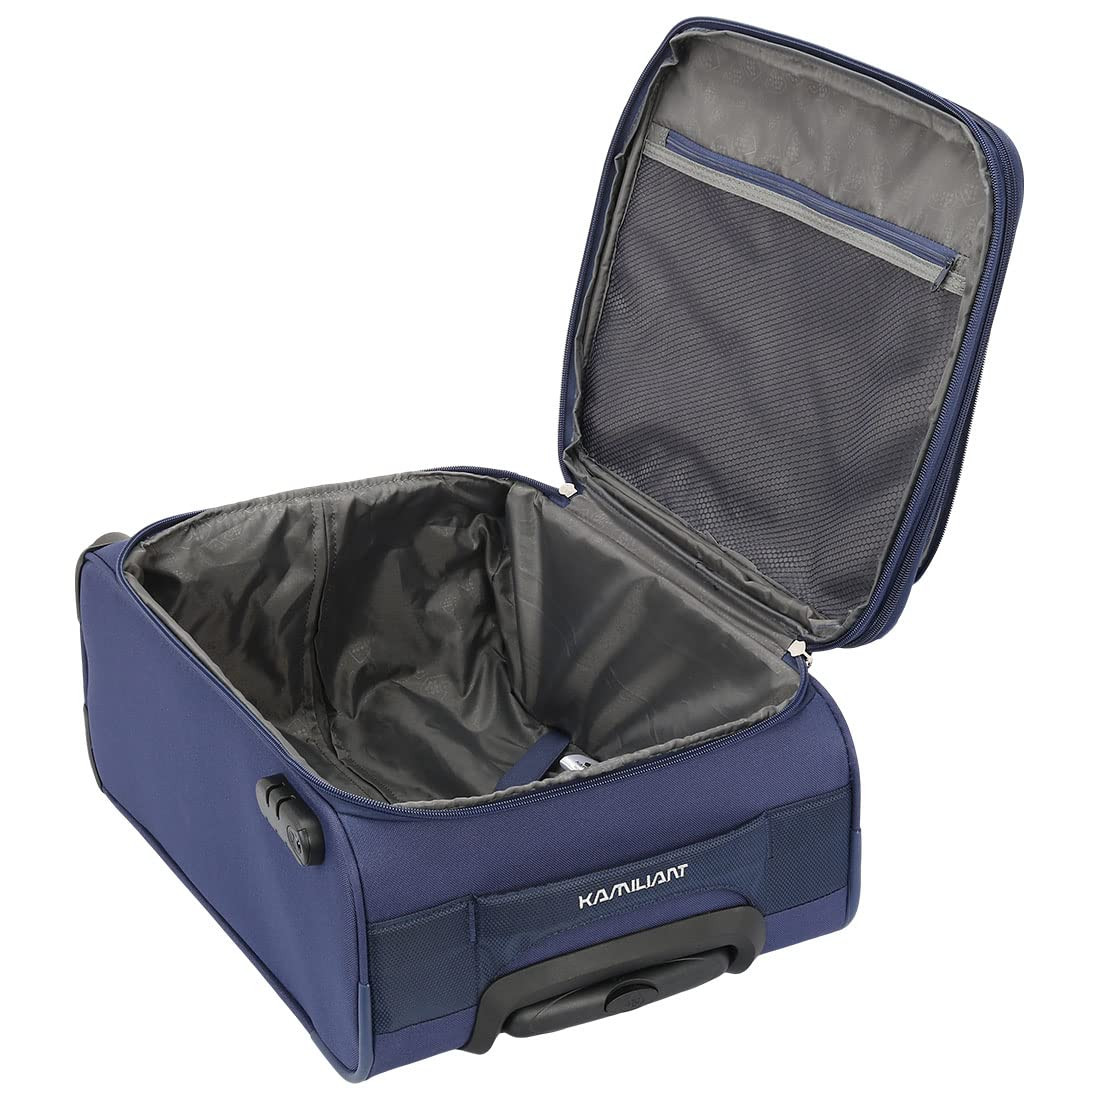 Kamiliant by American Tourister Kojo Polyester Soft Luggage Set of 3 Blue 56  68  78 Cm